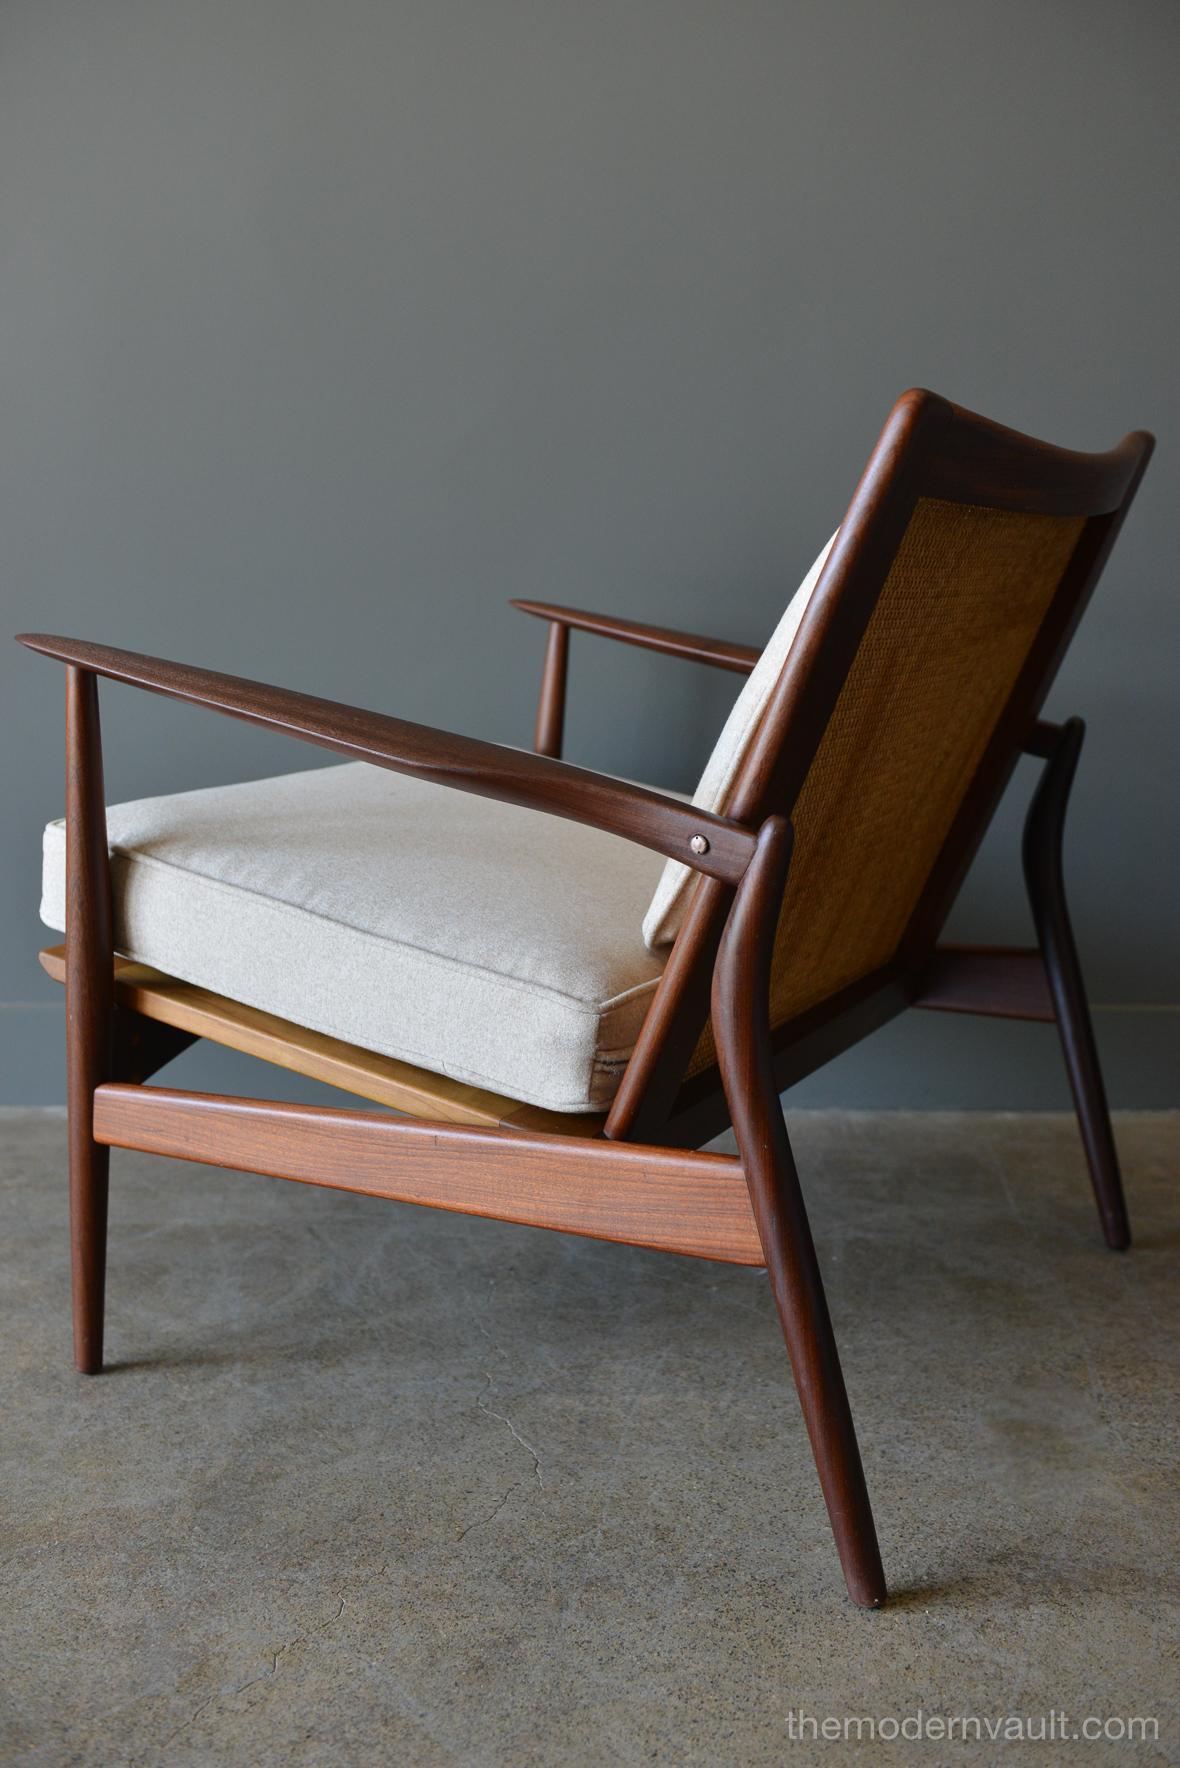 Early spear chair model 544-15 by I.B. Kofod Larsen, circa 1960. Stained beech and teak frame in original condition with original cane. Frame and cane is original and unrestored. Cushions have been restored to exacting dimensions in a beautiful tan